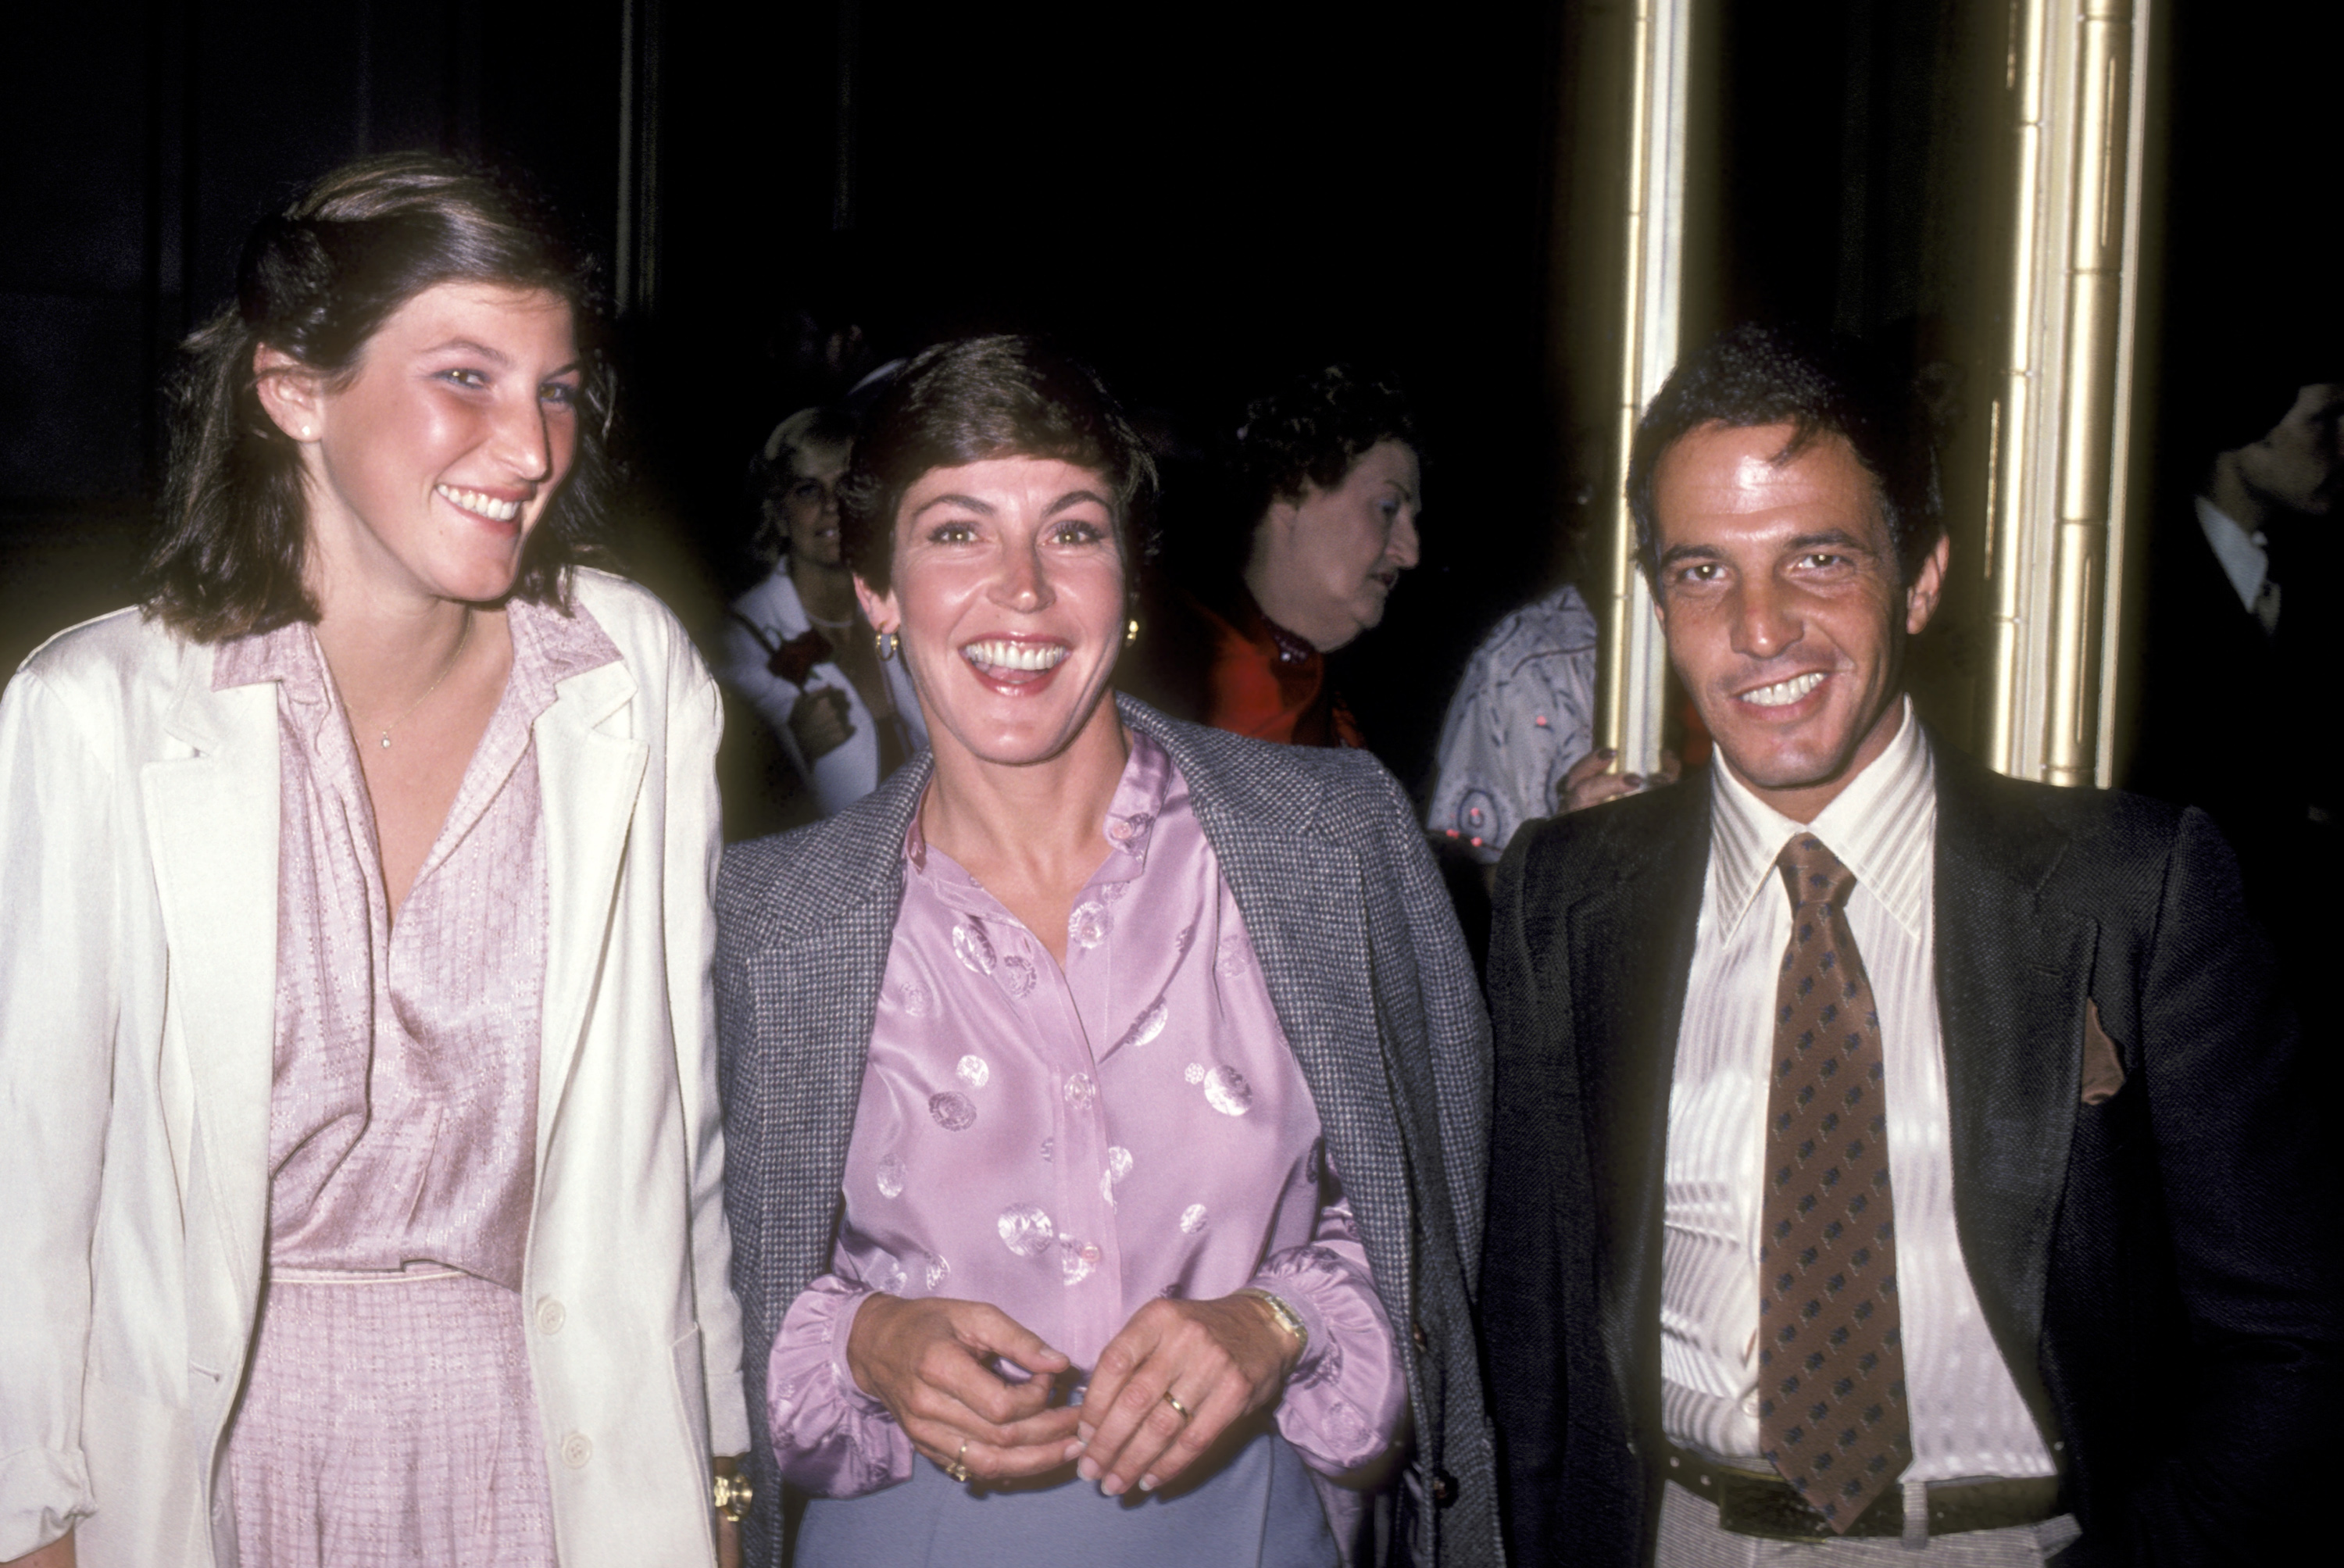 Traci Donat, Helen Reddy and husband Manager Jeff Wald attend the Presidential Fundraiser Dinner for Governor Jerry Brown on February 29, 1980 at Beverly Wilshire Hotel in Beverly Hills, California.